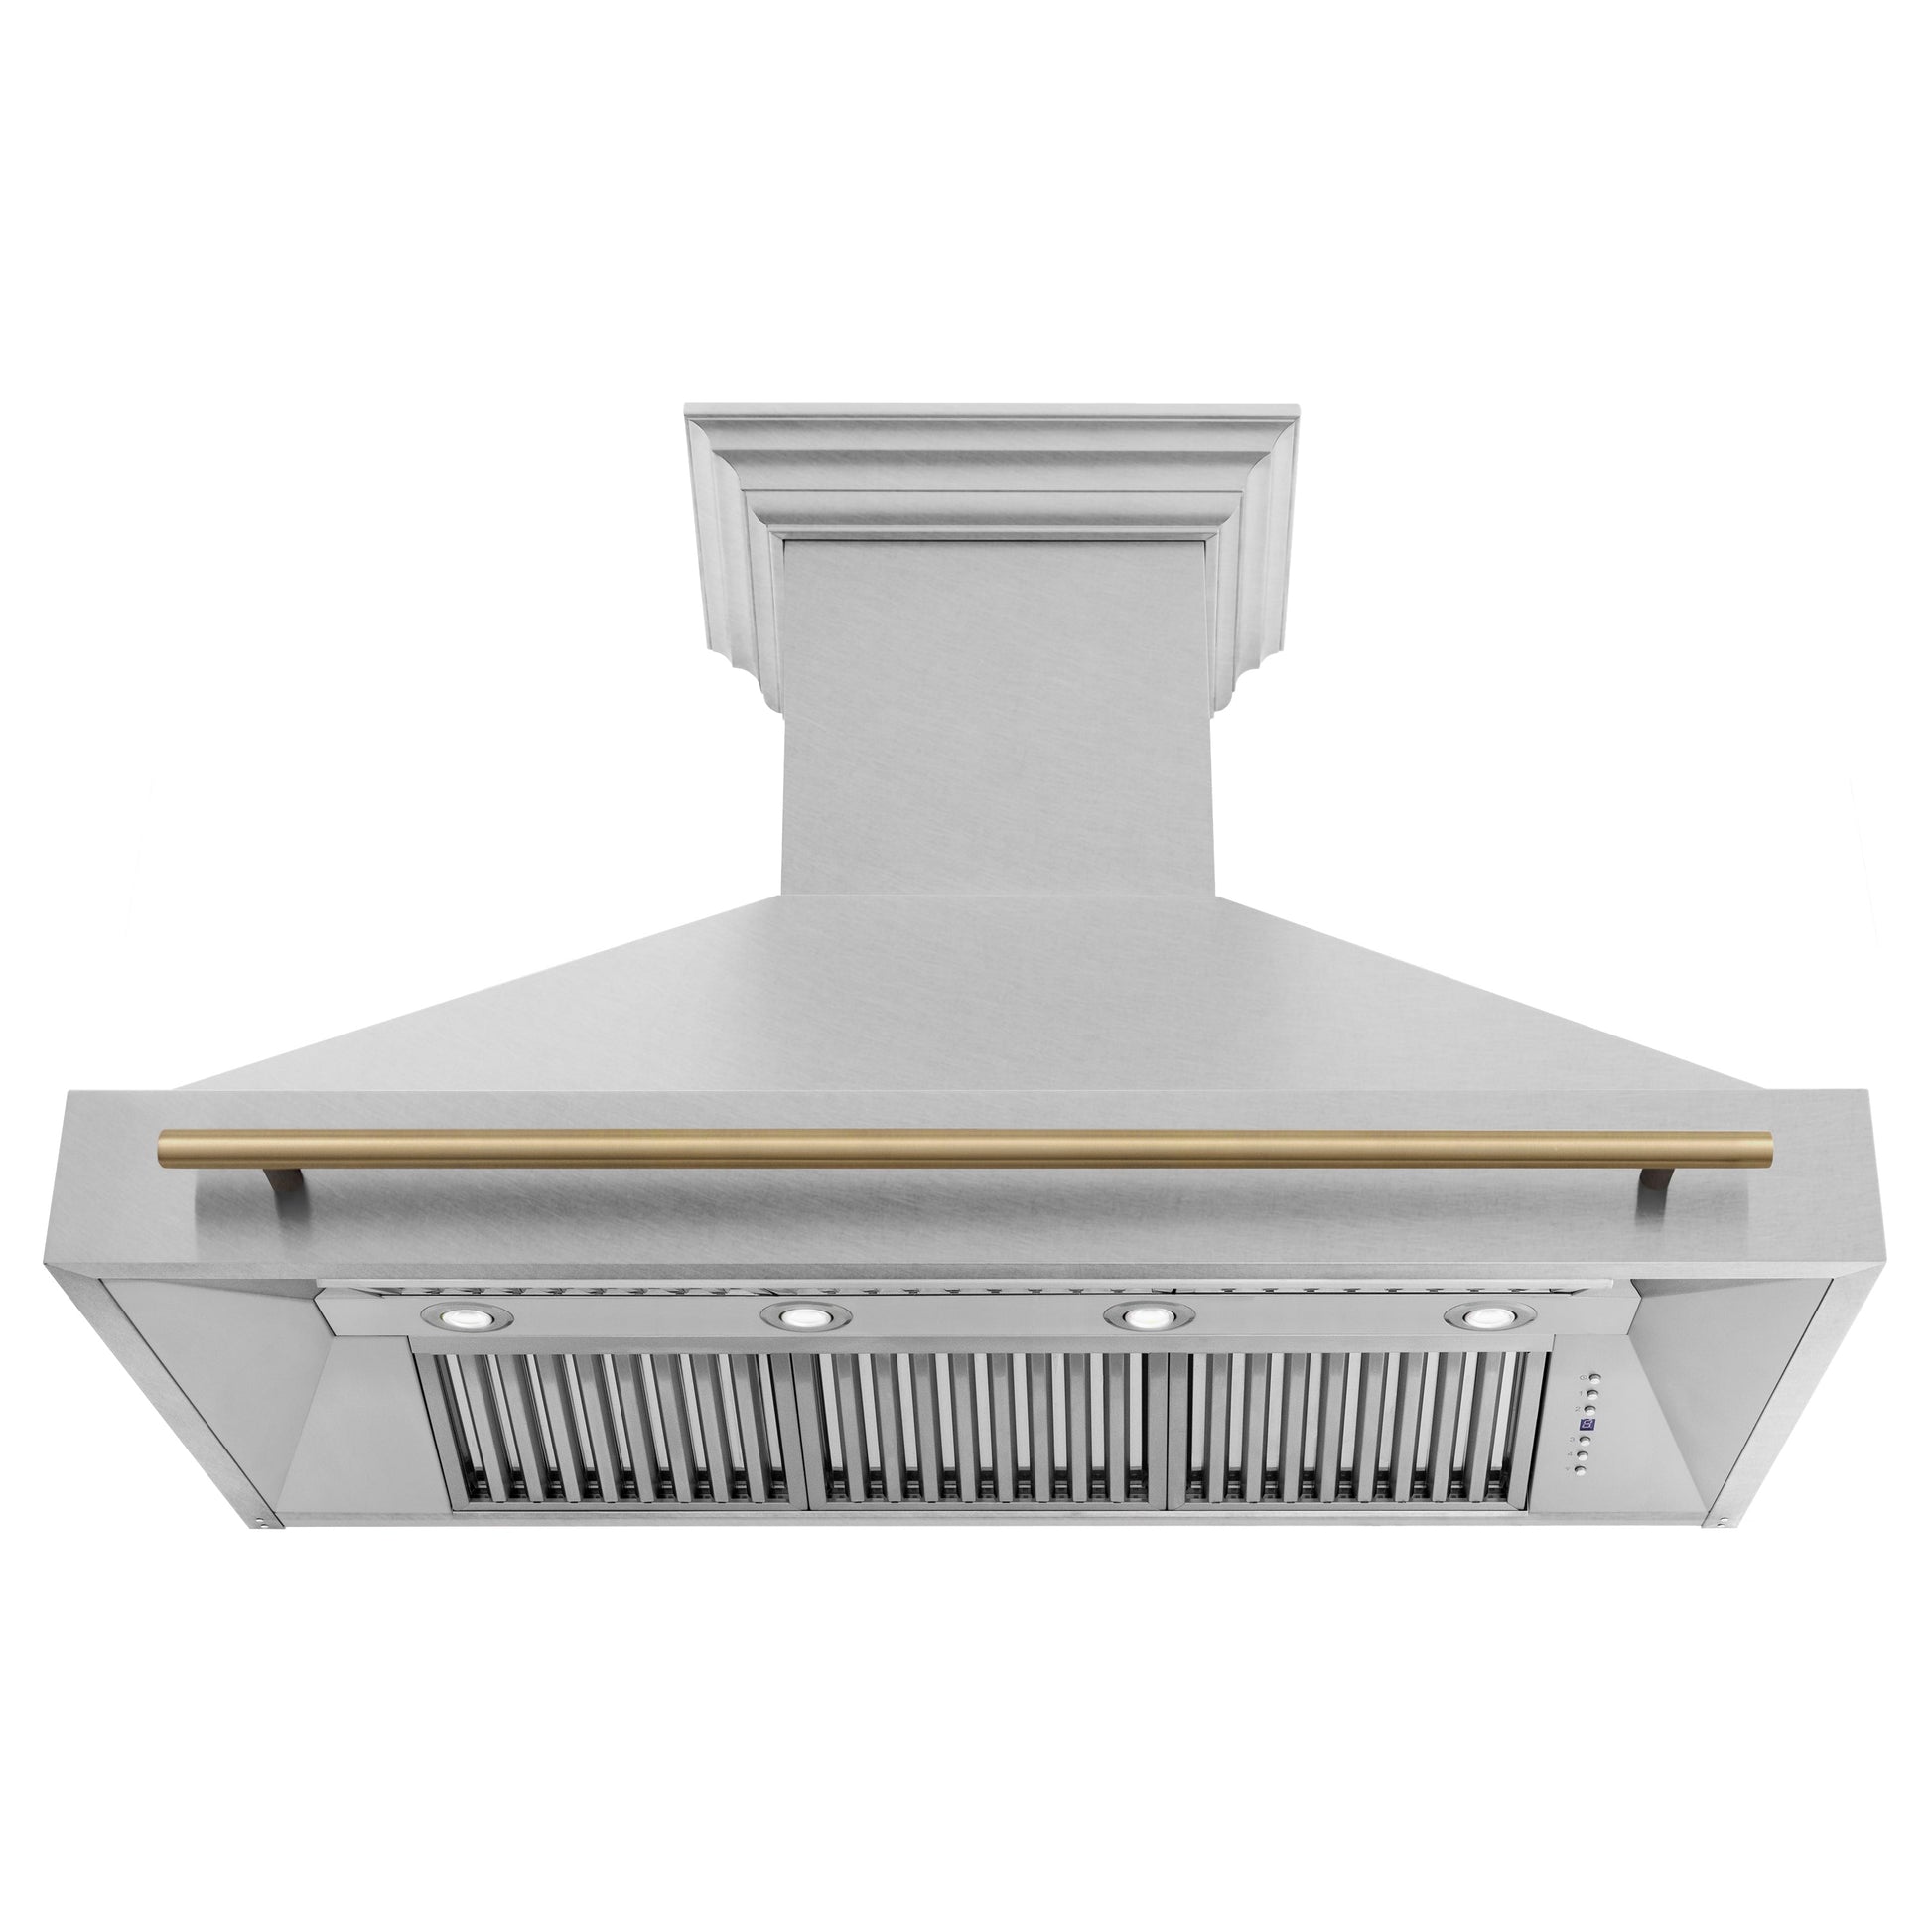 ZLINE Autograph Edition 48" Durasnow Stainless Steel 4-speed 700 CFM Range Hood With LED Lighting and Champagne Bronze Handle